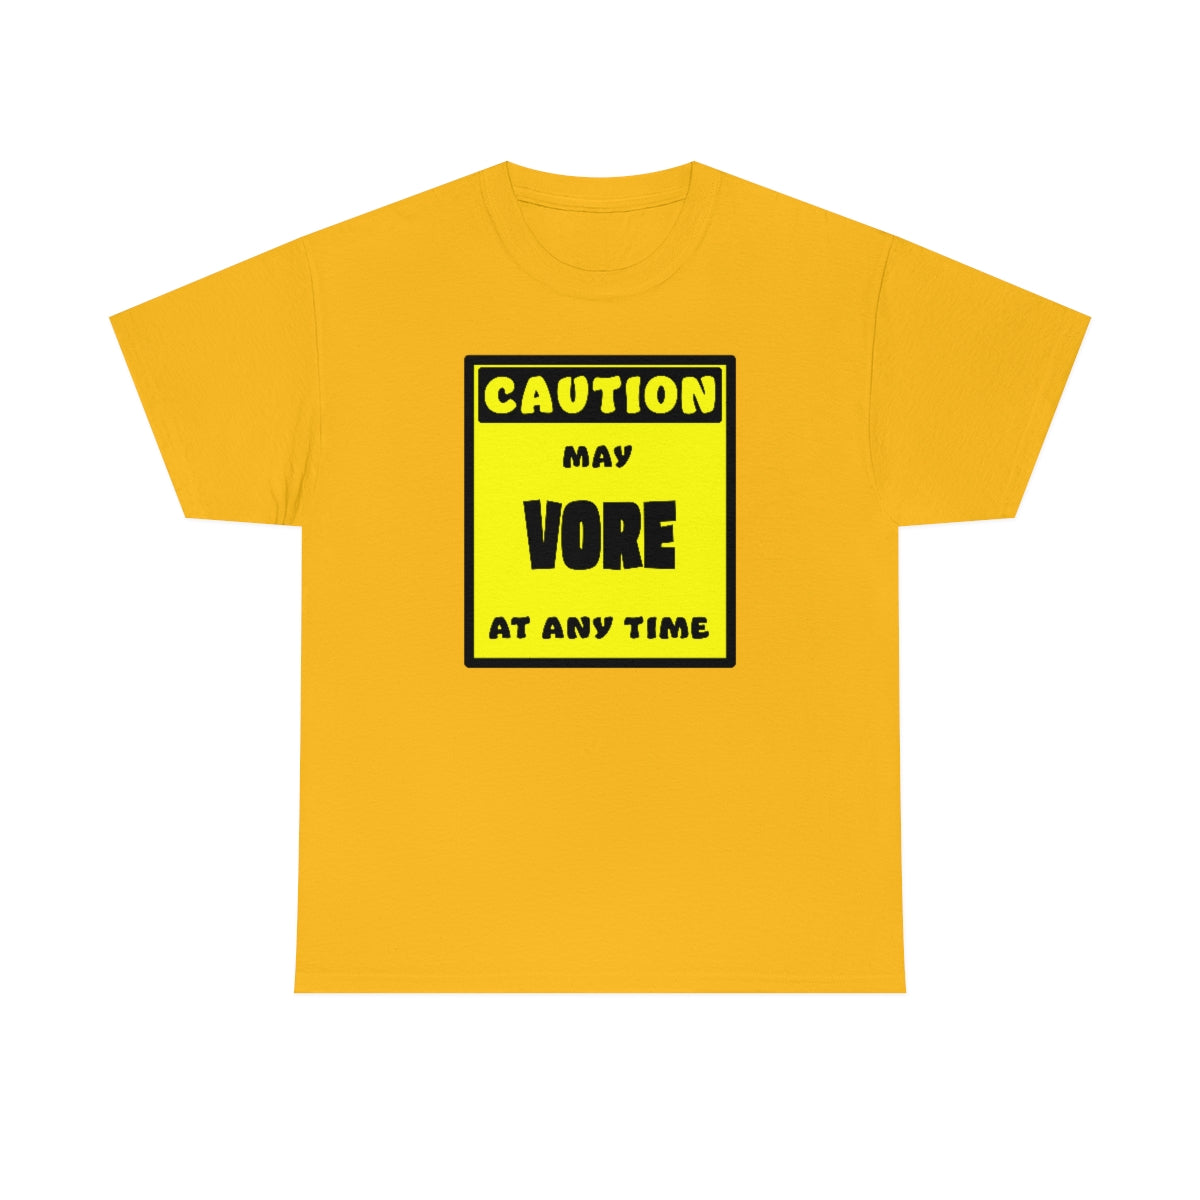 CAUTION! May VORE at any time! - T-Shirt T-Shirt AFLT-Whootorca Gold S 